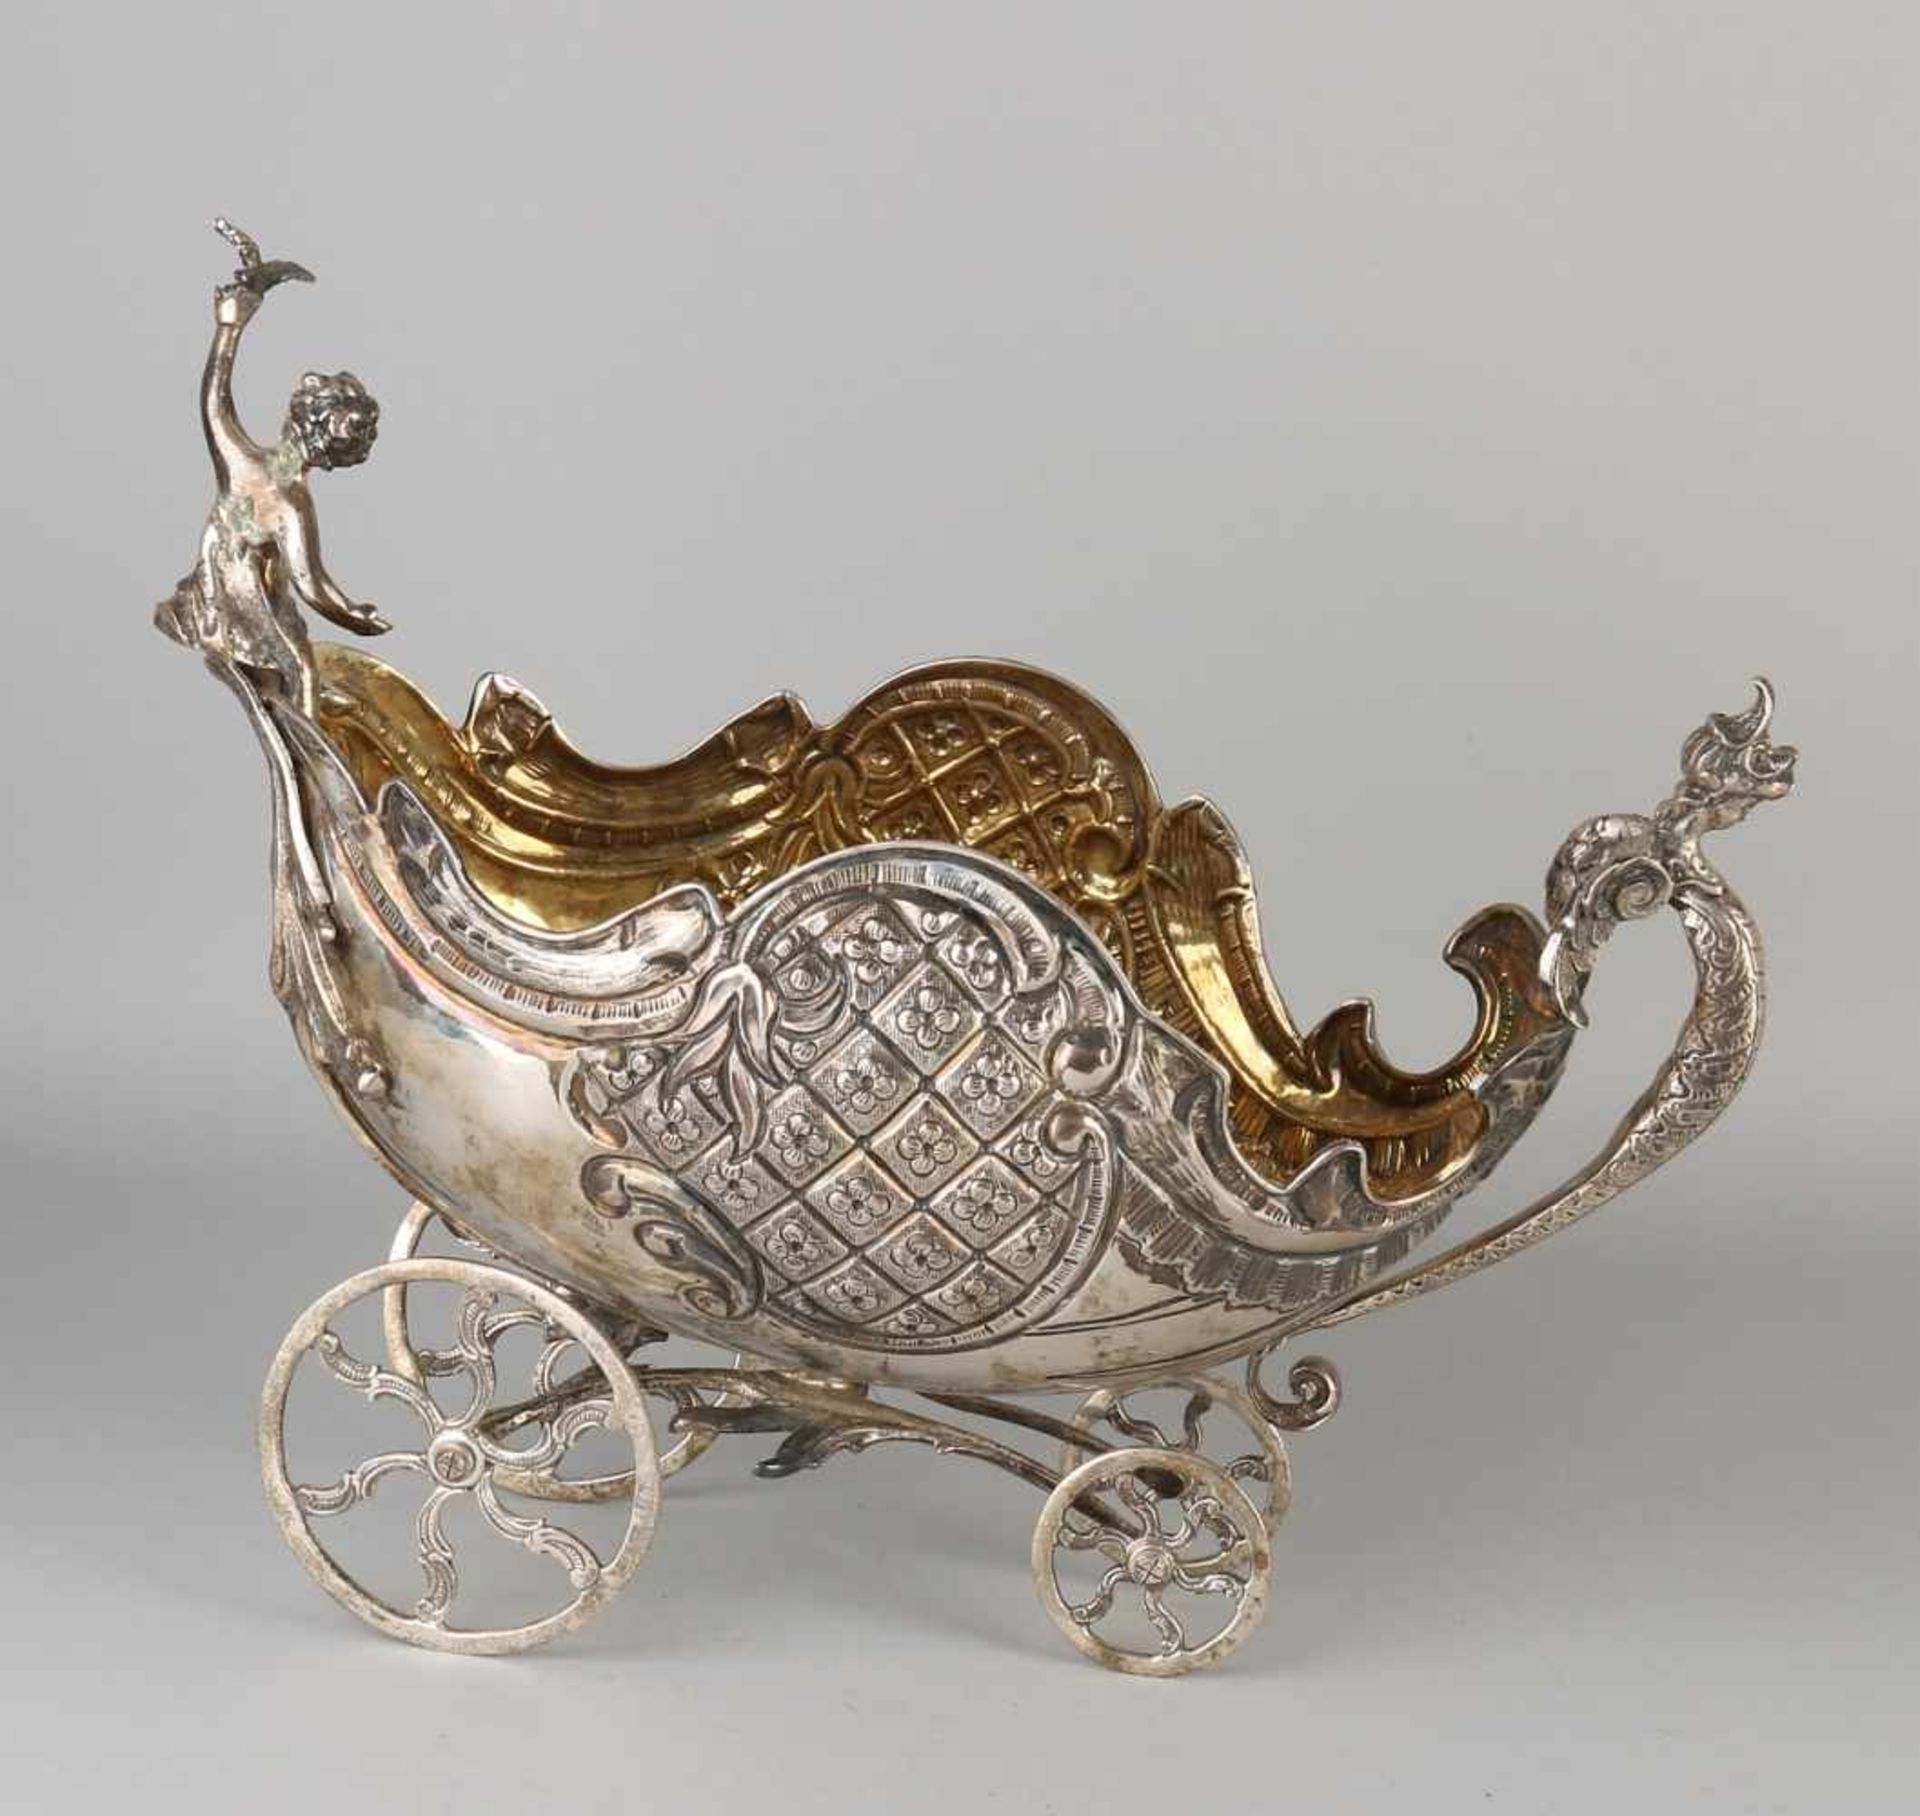 Beautiful silver victory-carriage, 800/000, lavishly decorated with acanthus leaves, palmettes and - Bild 3 aus 3